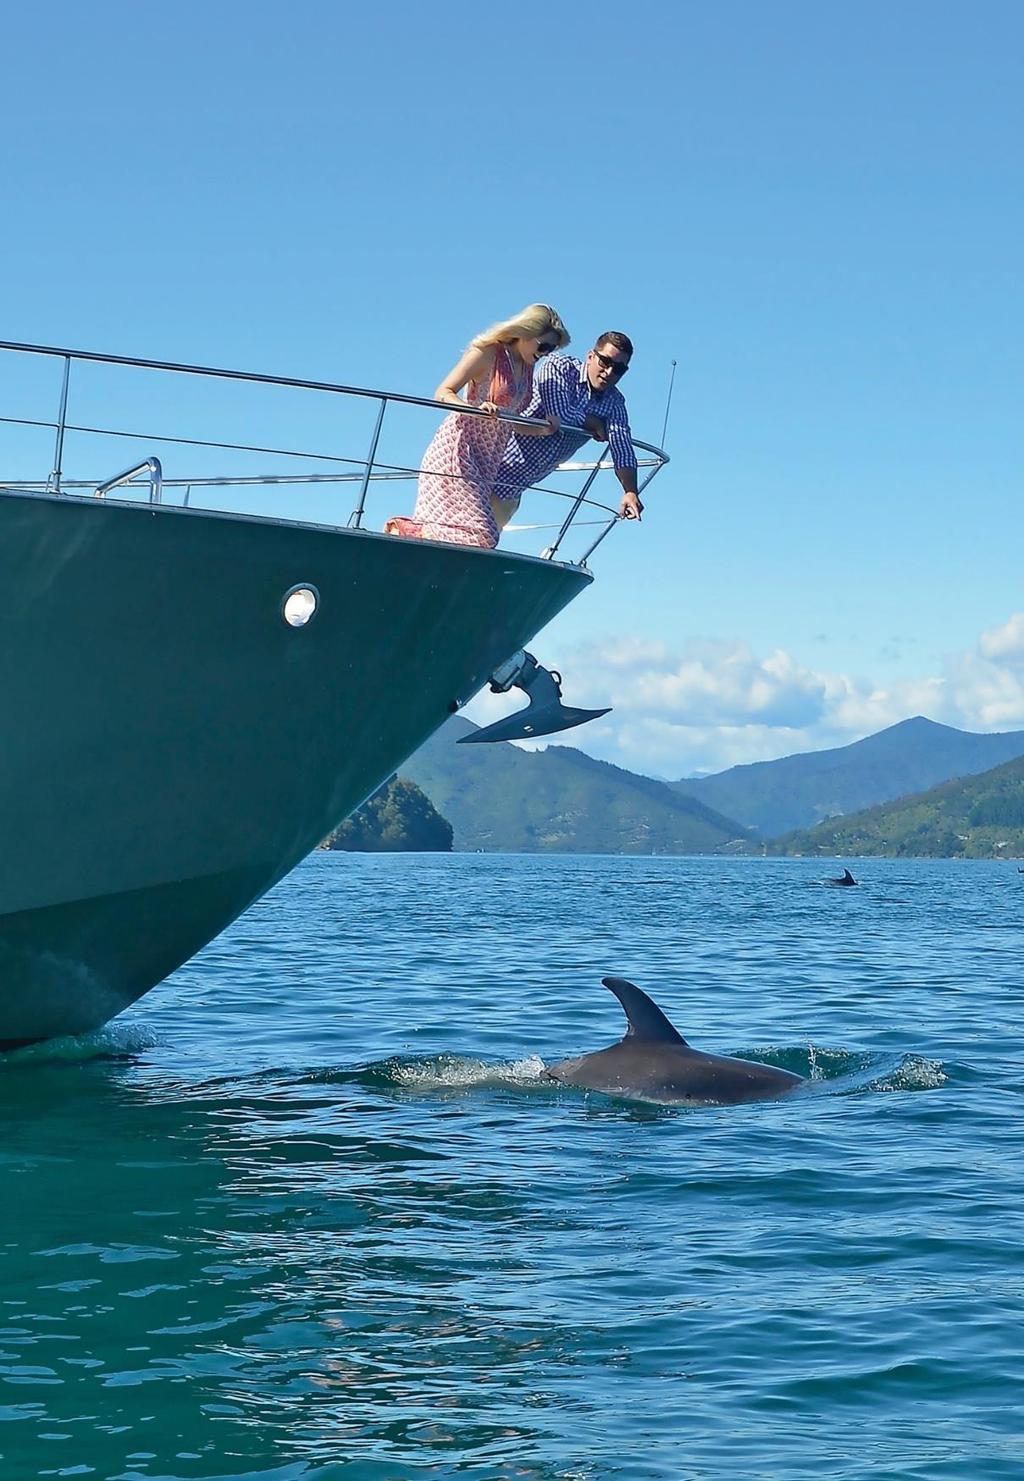 IMMERSE YOURSELF Cruise the endless bays and coves of the Marlborough Sounds, a fabulous enclosed waterway offering over 1,500 kilometres of coastline that s 10% of New Zealand s seashore.